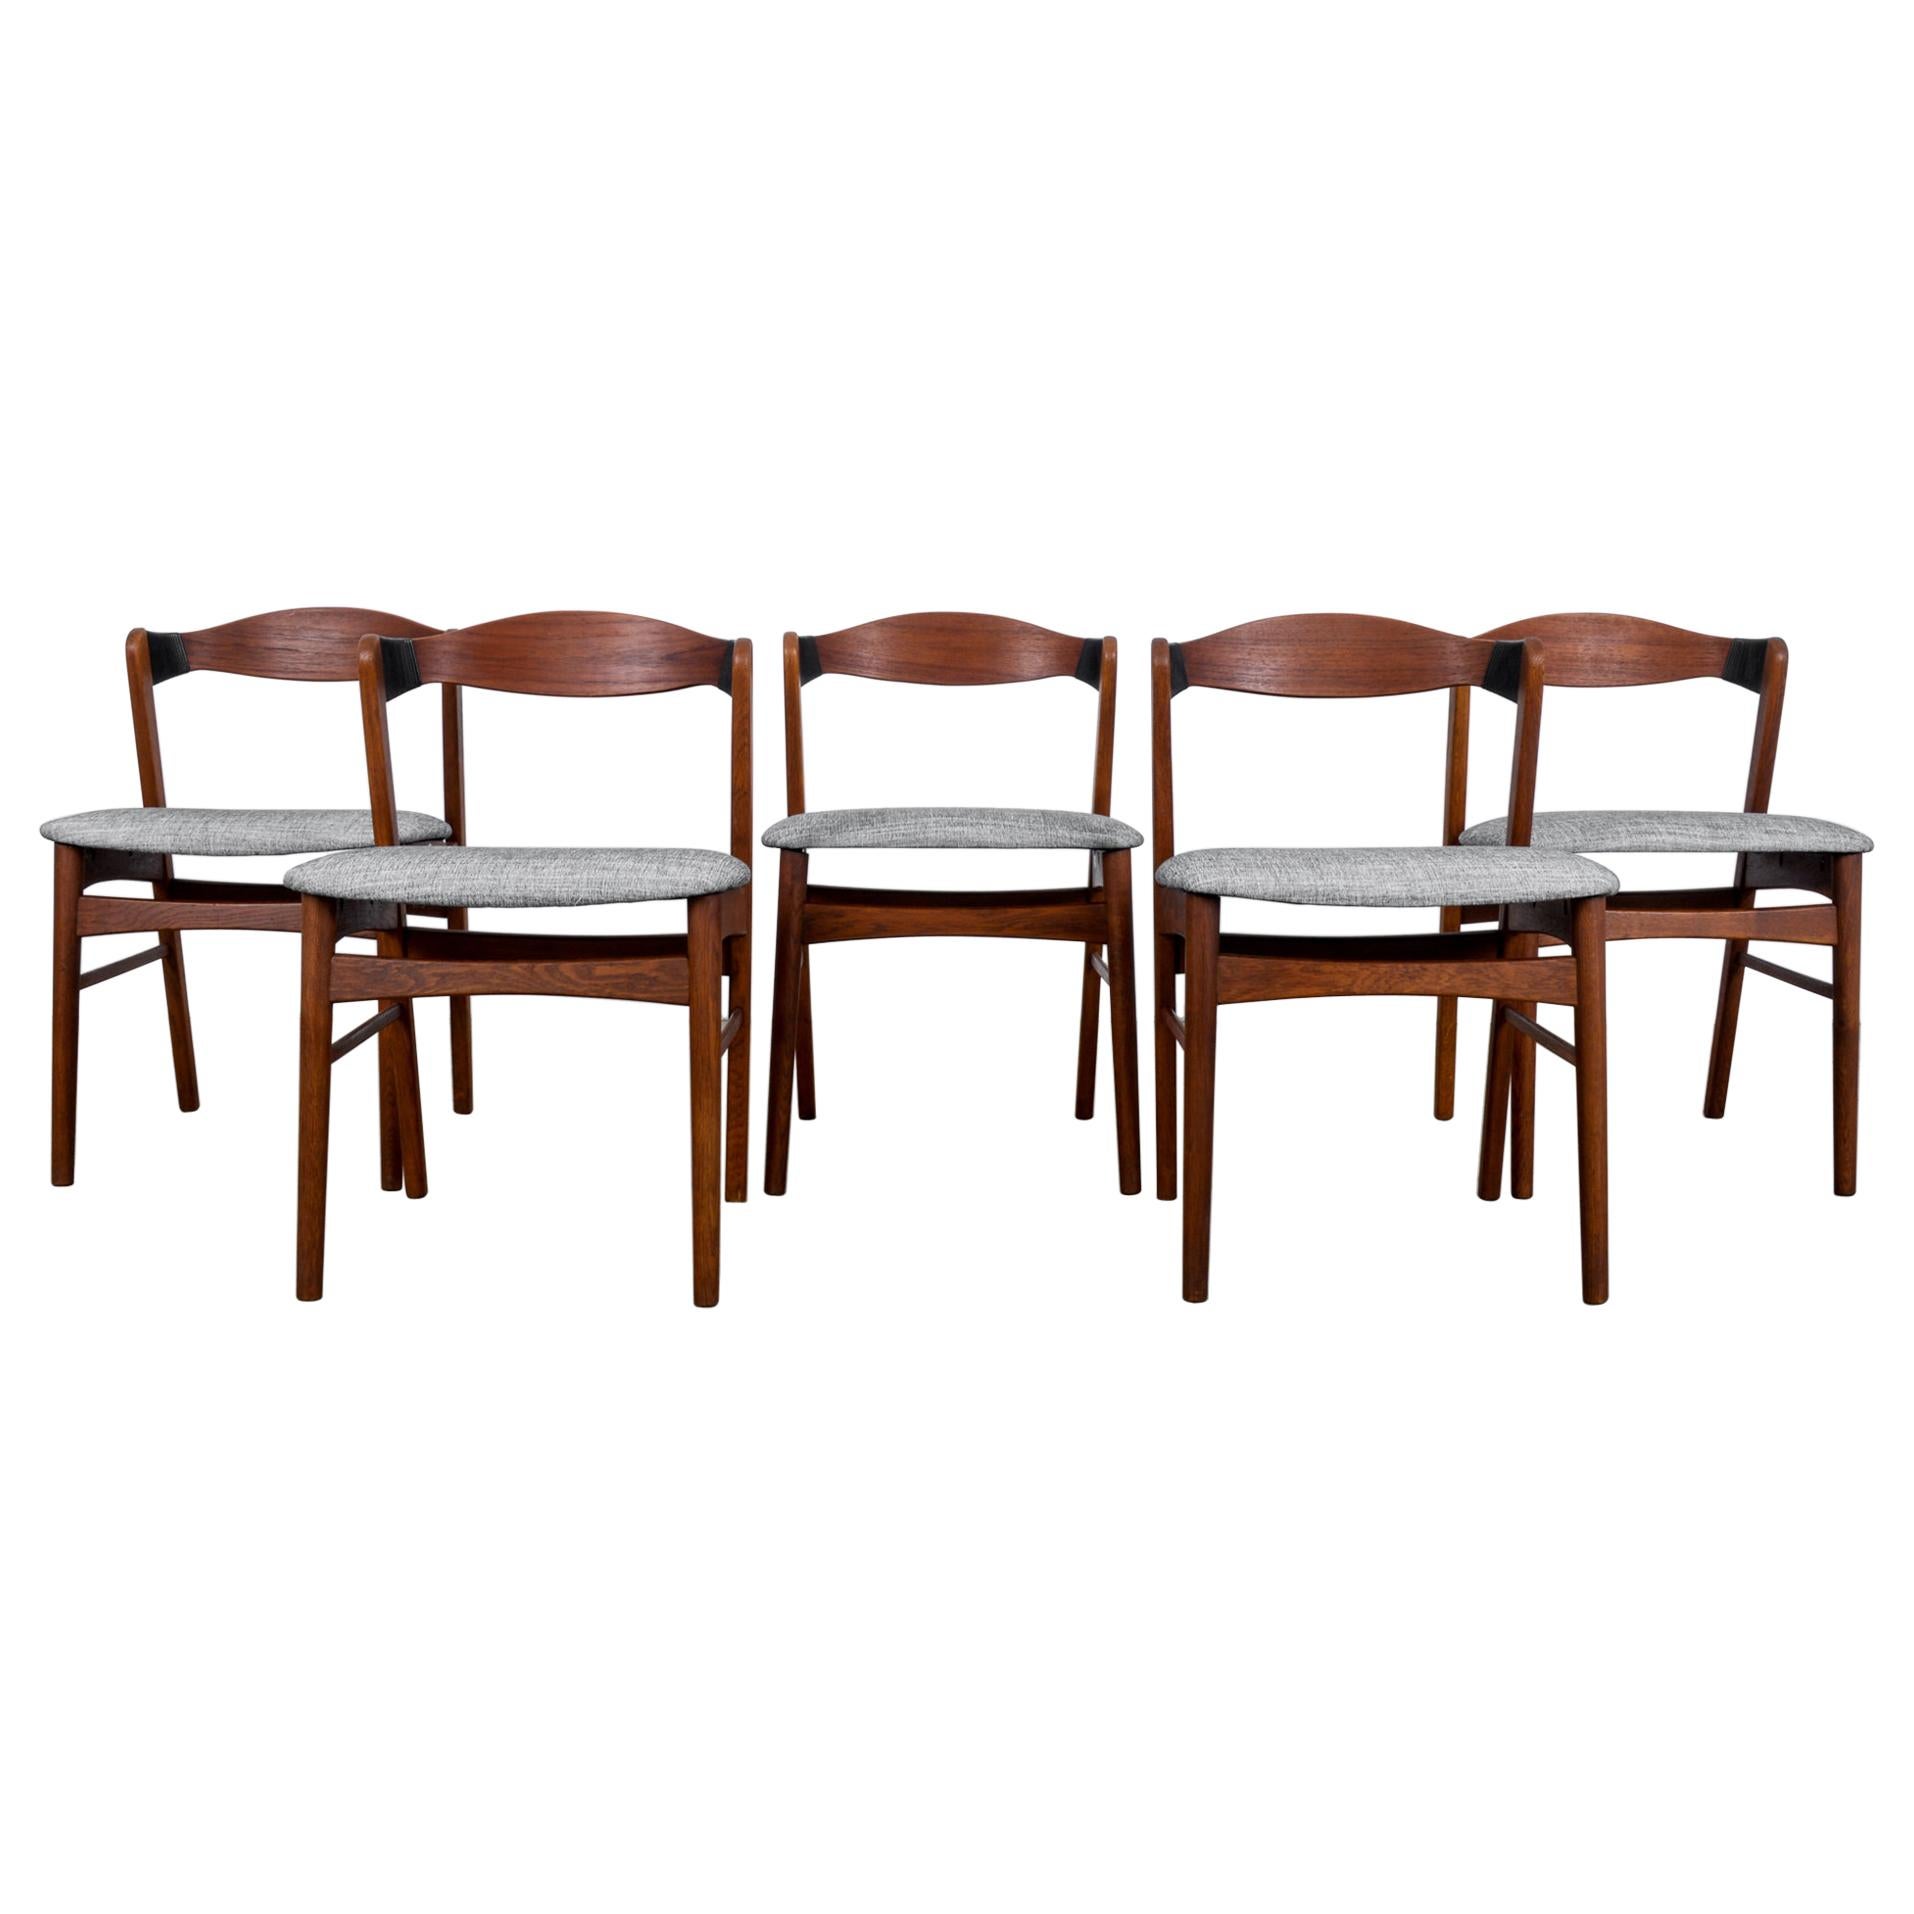 1960s Danish Teak Chairs with Upholstered Seats, Set of Five